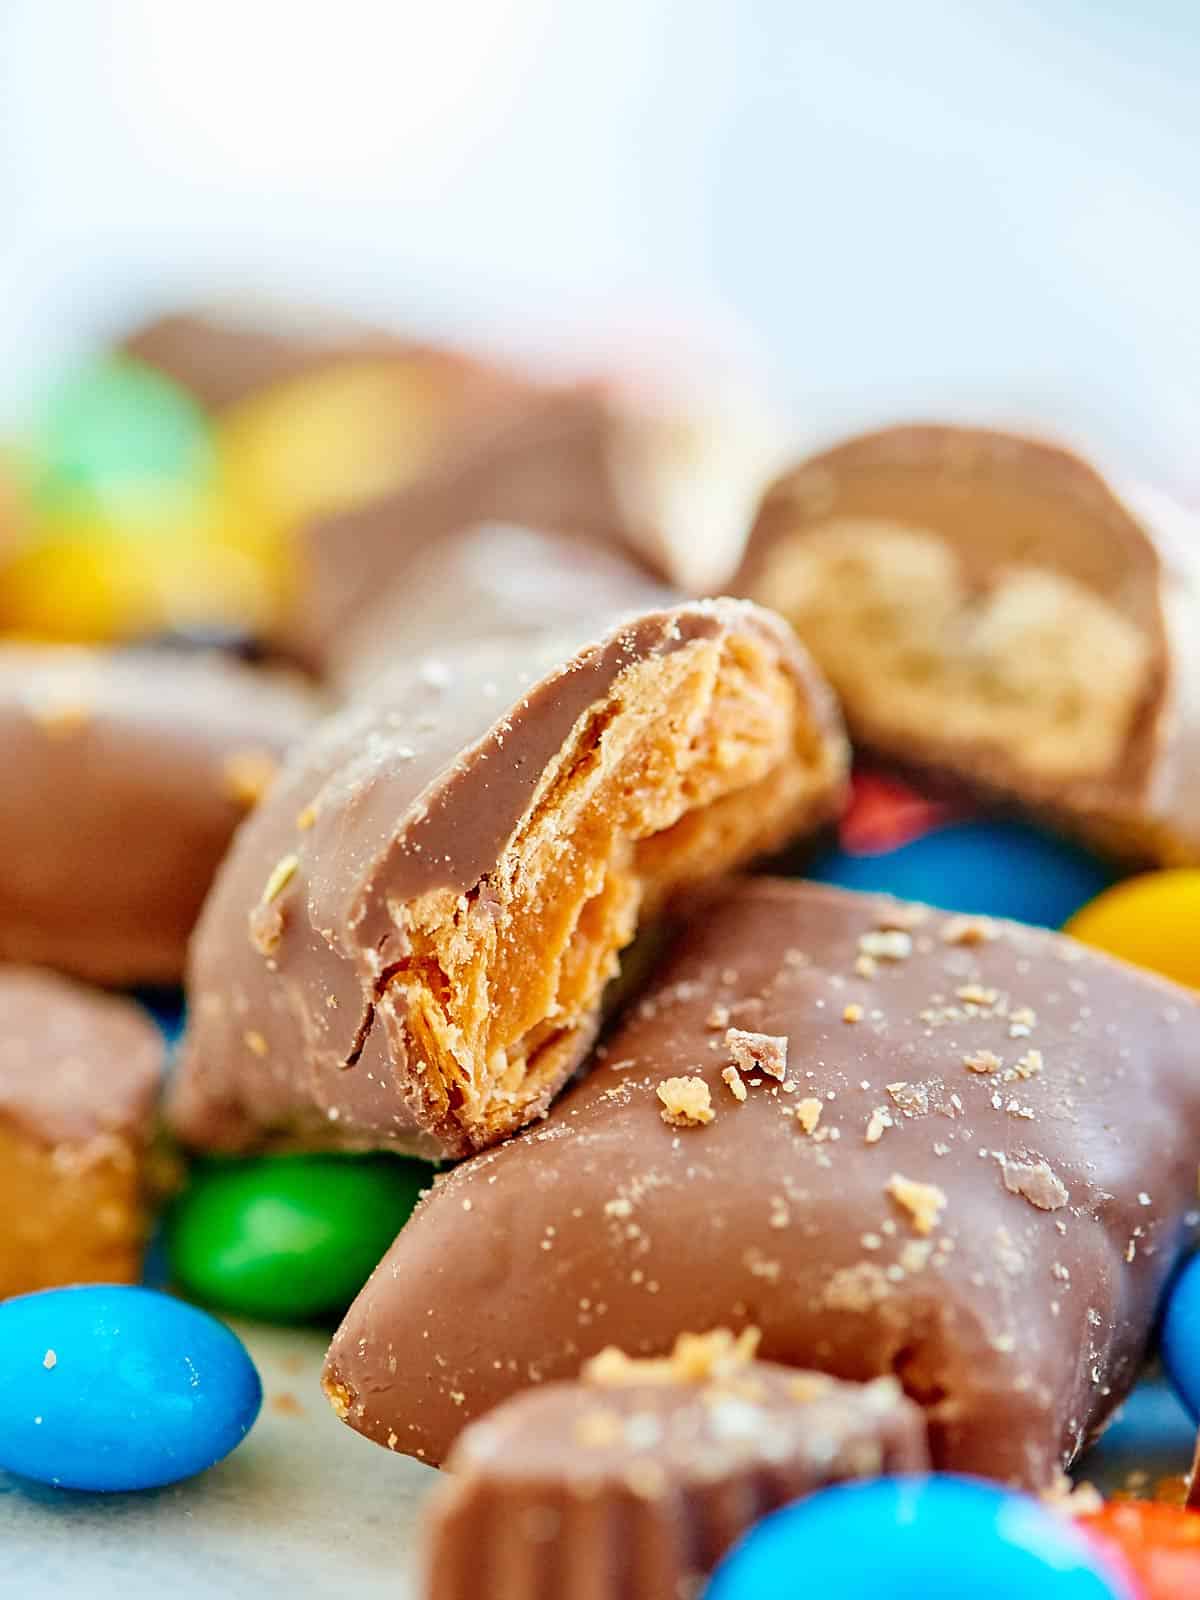 Leftover Halloween Candy Recipes - Show Me the Yummy